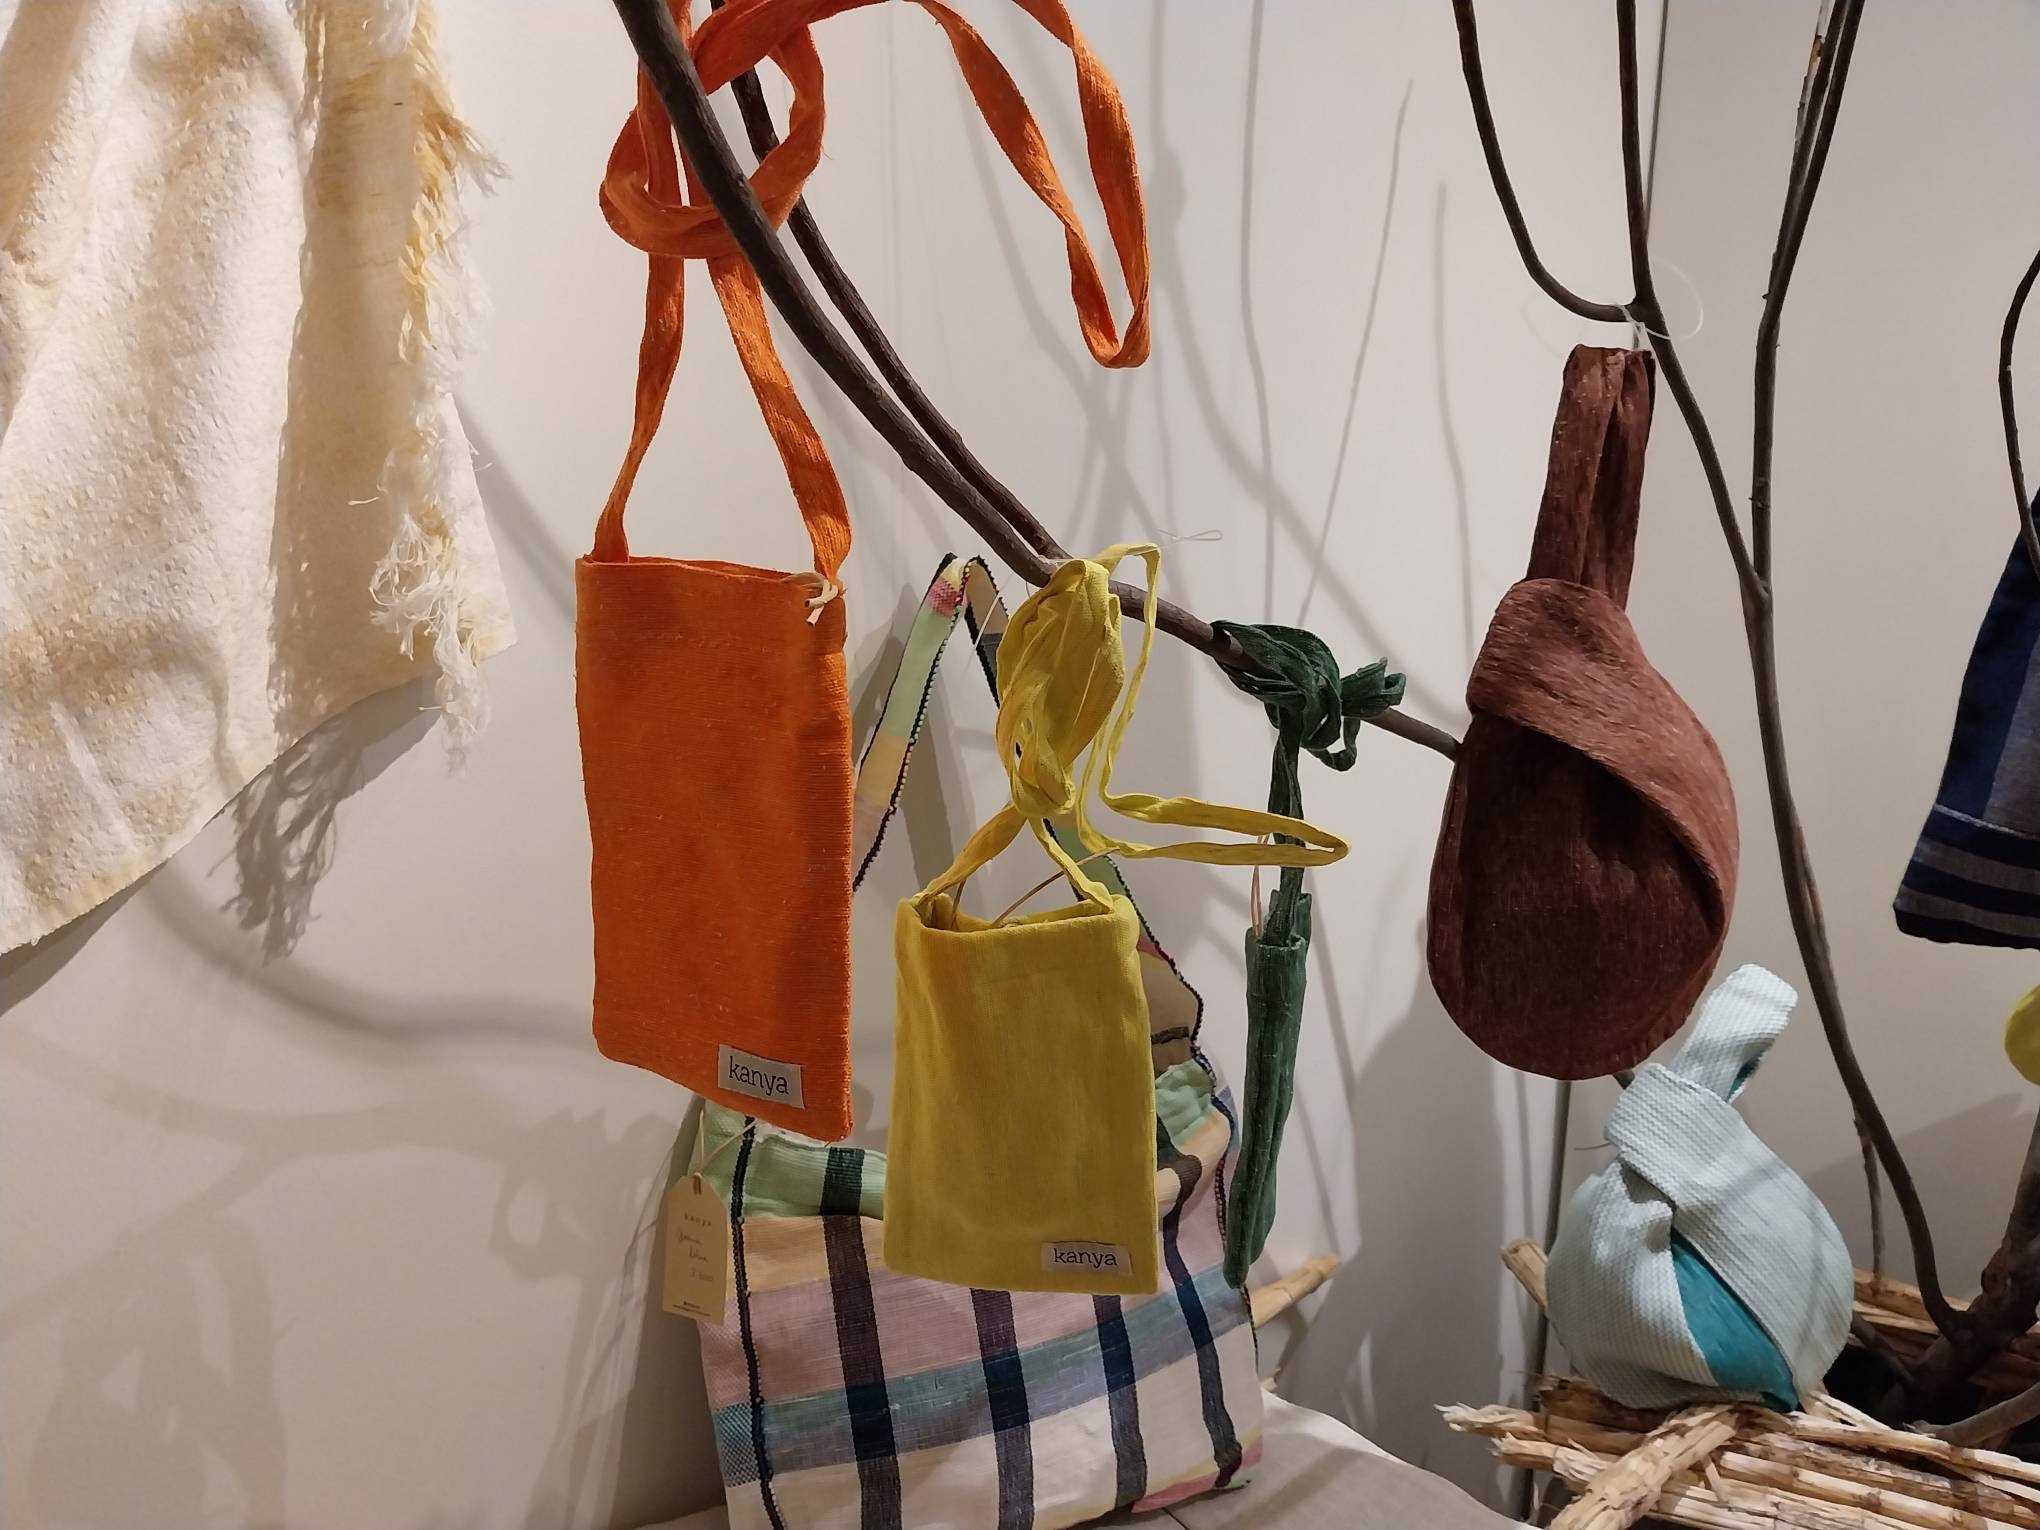 Some of the bags selection of Kanya for "Heritage in Bloom." Photo by Elle Yap.